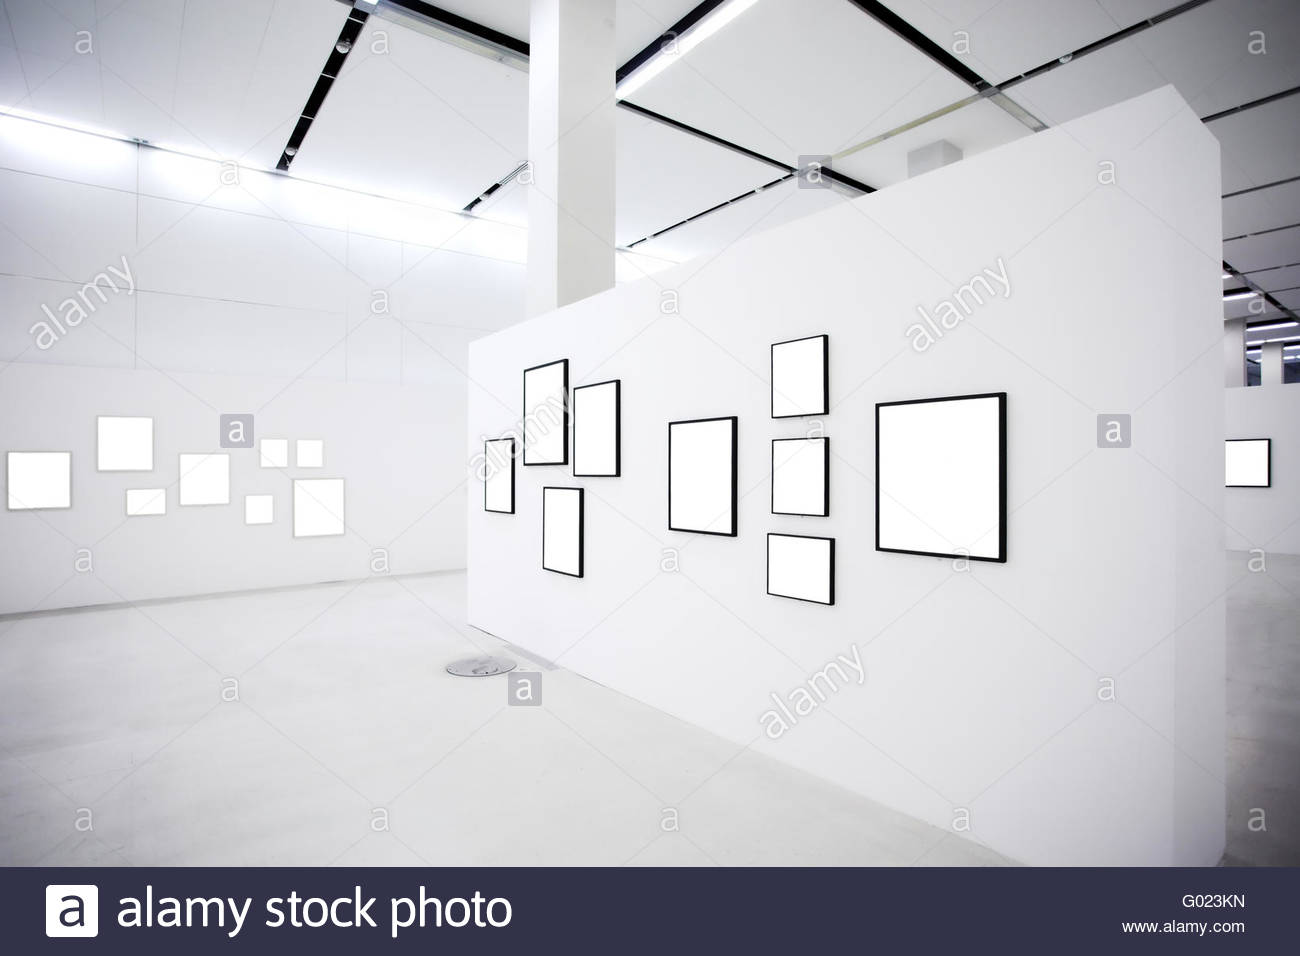 Exhibition in museum with many empty frames on white walls Stock Photo ...